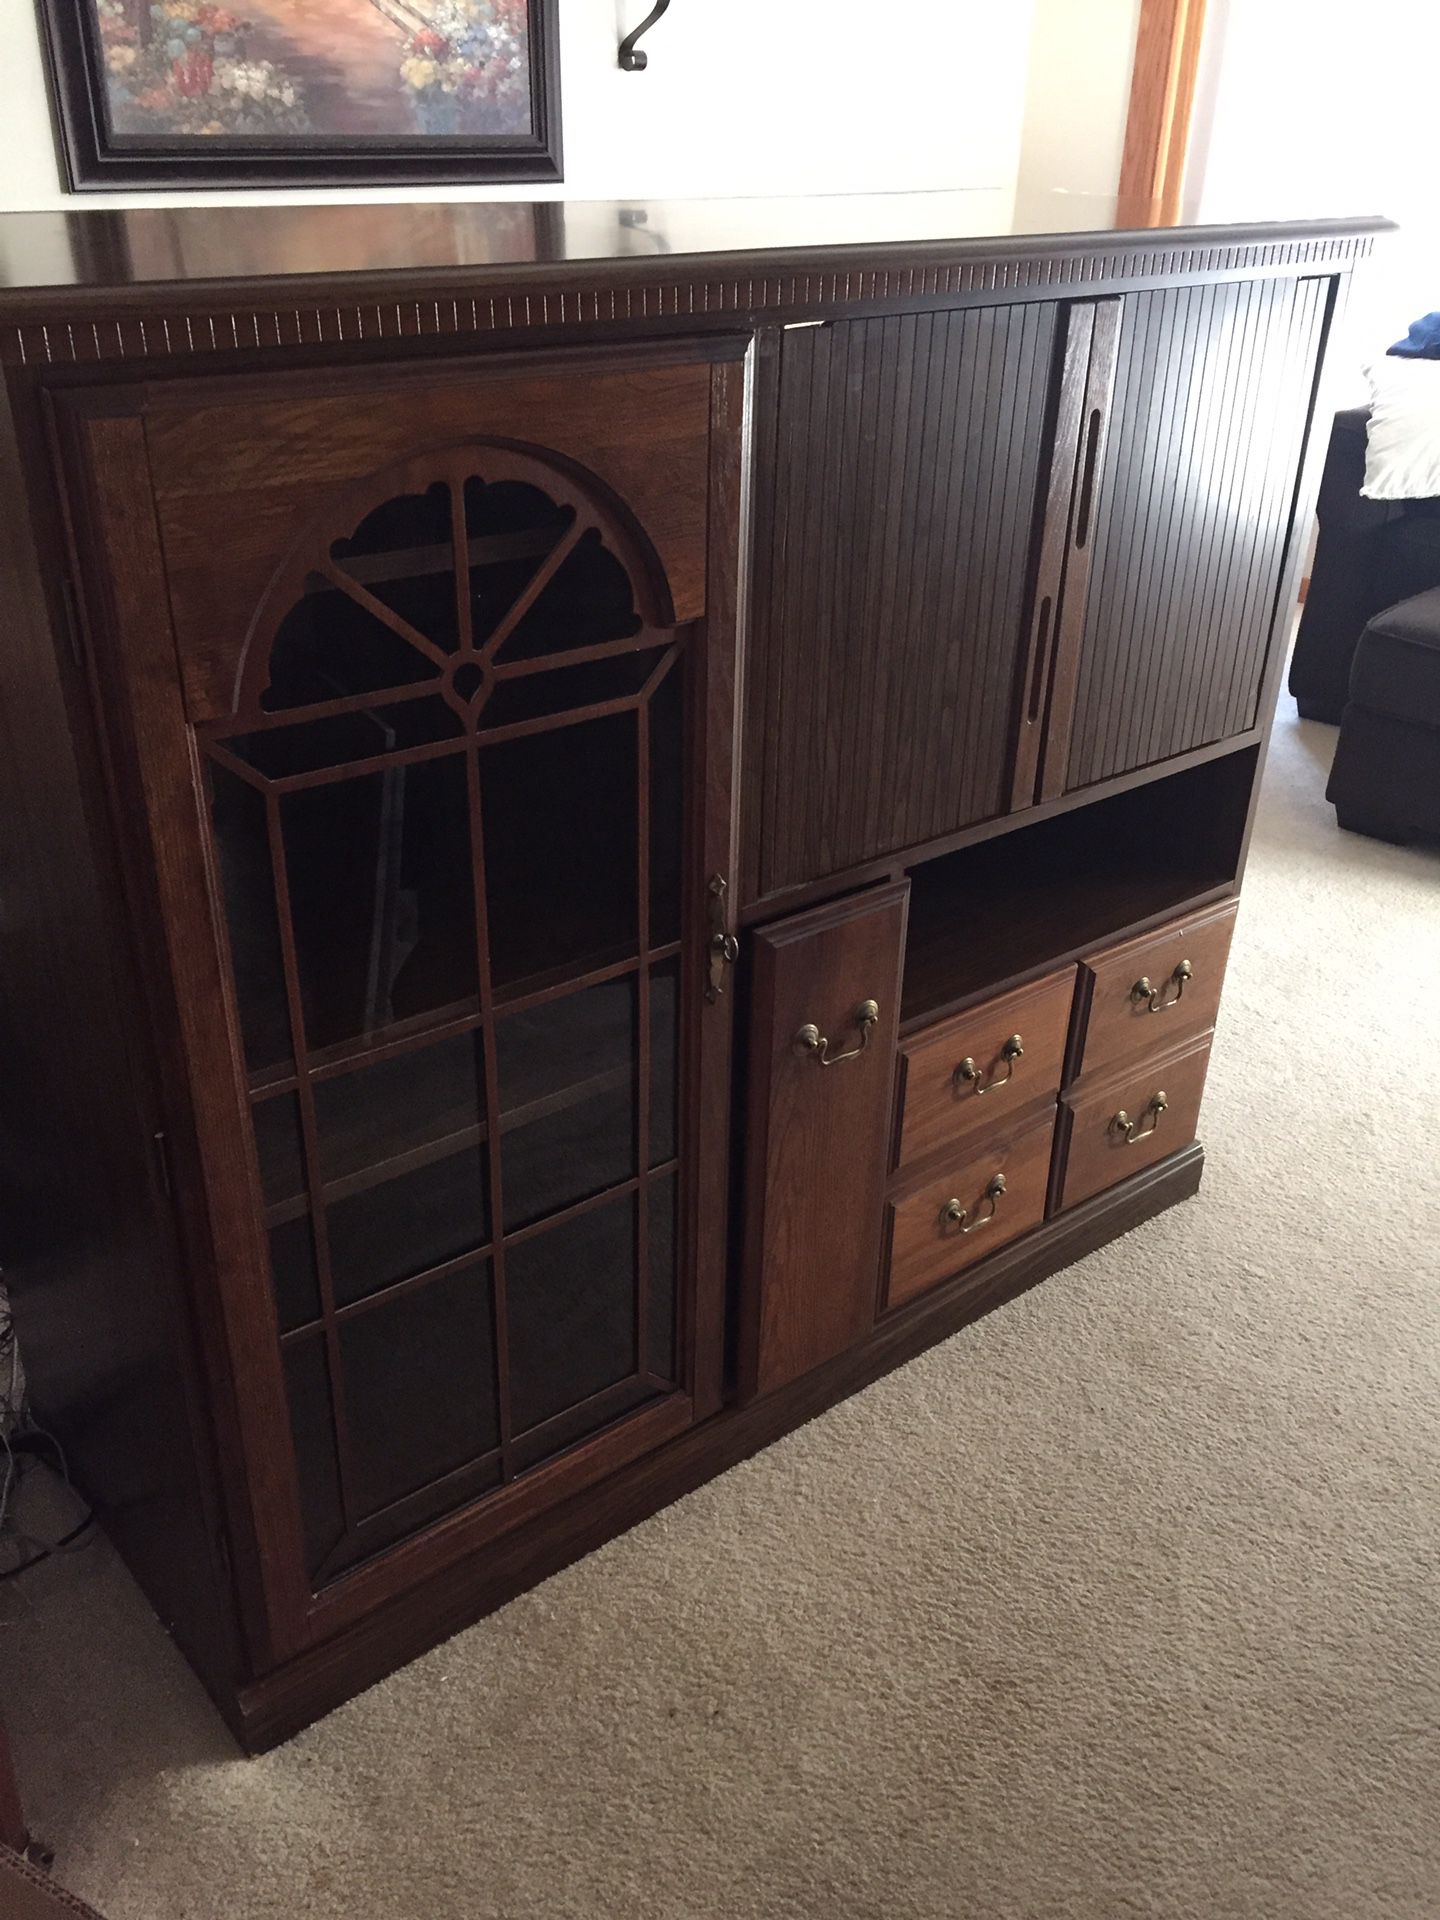 TV stand / storage wall unit, oak cabinet glass door front very good condition. The unit is 47" tall 55" wide and 21" deep.